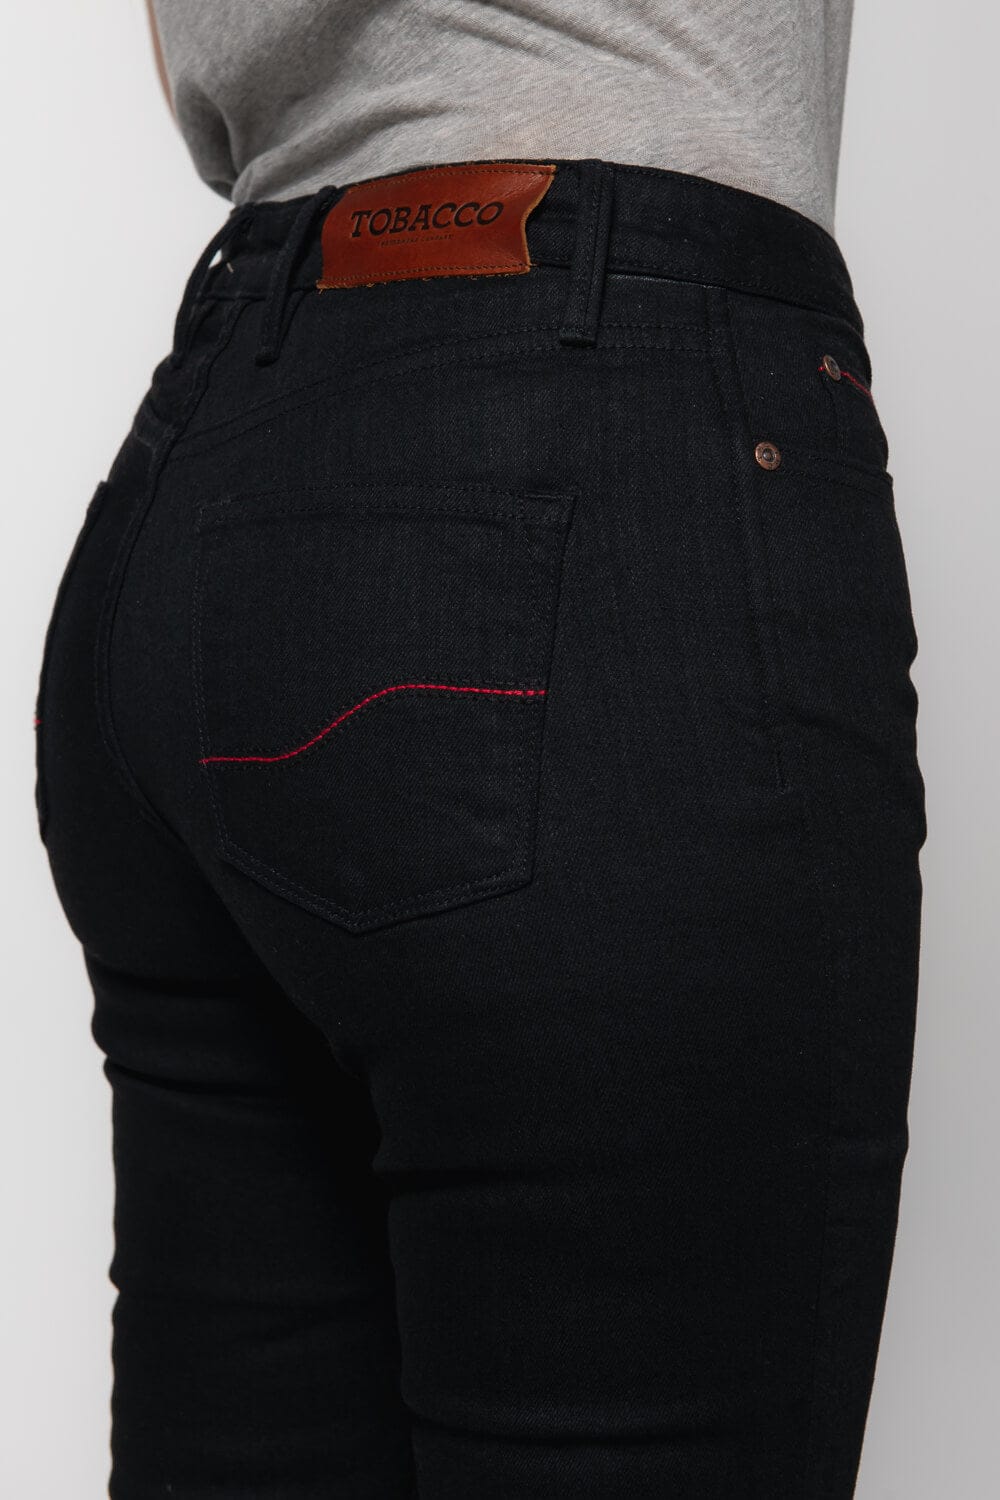 Runaways - Women's Jet Black Protective Riding Jeans. Features